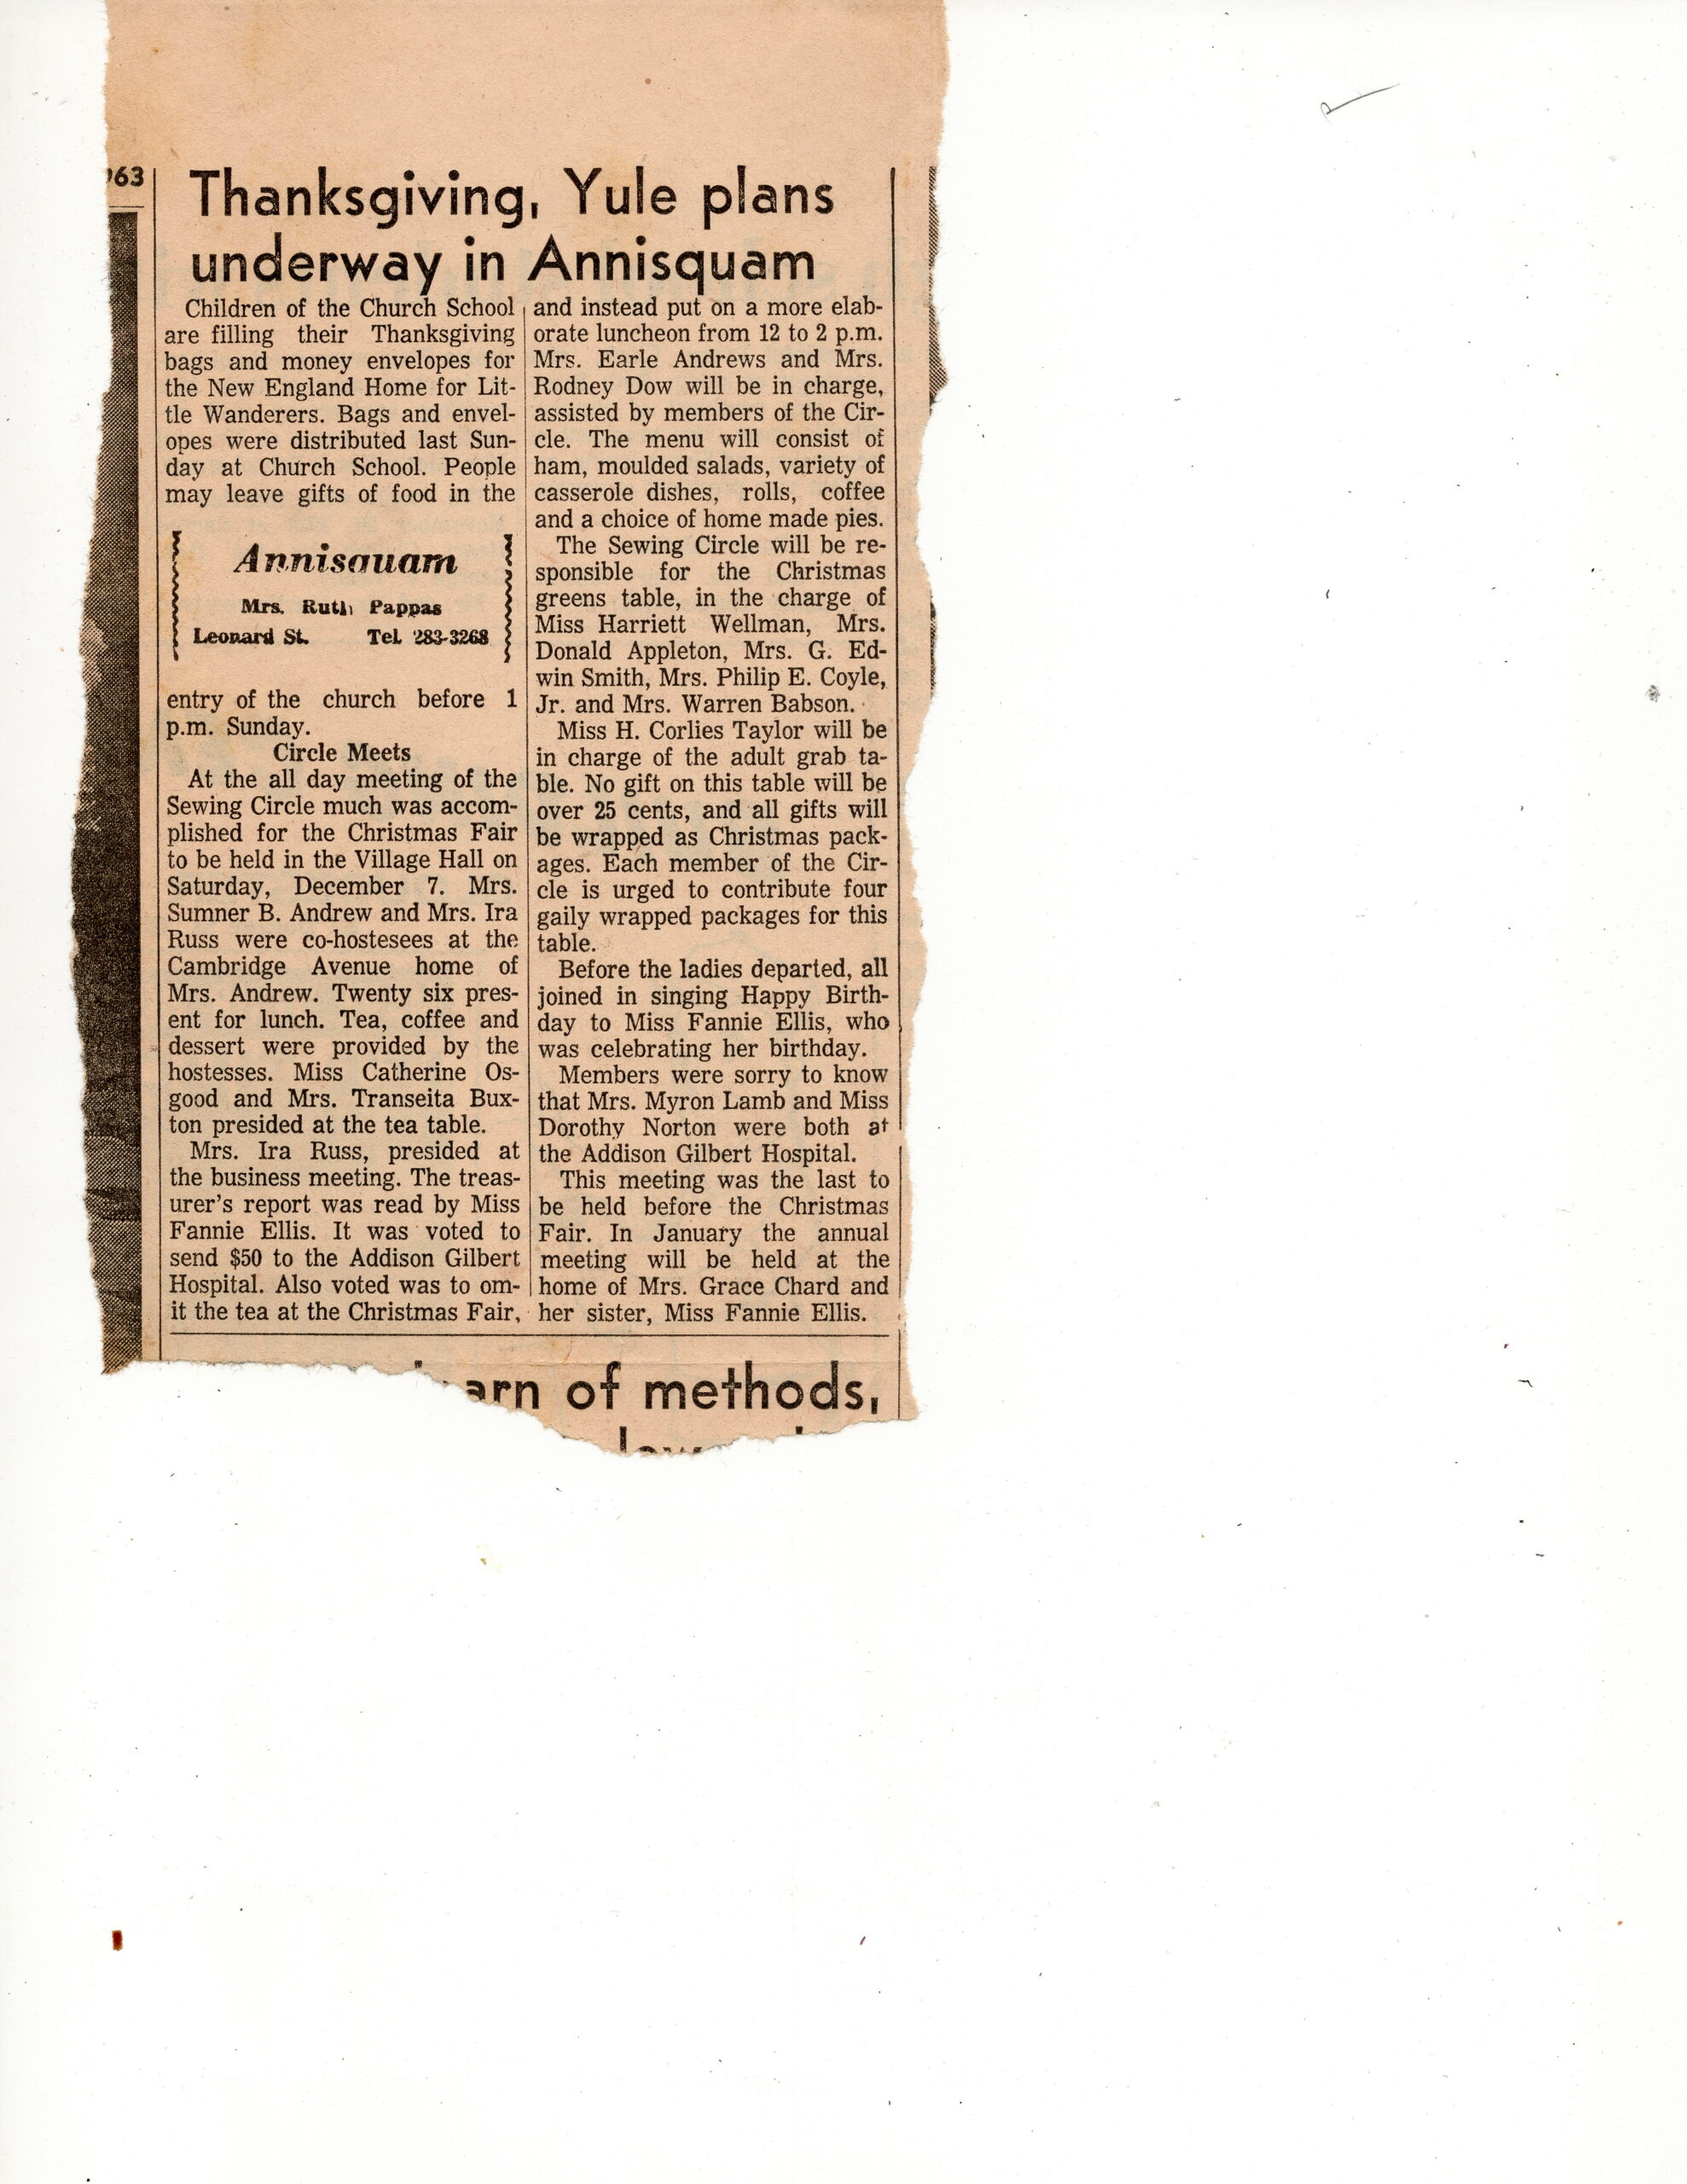 Newspaper clipping - Thanksgiving